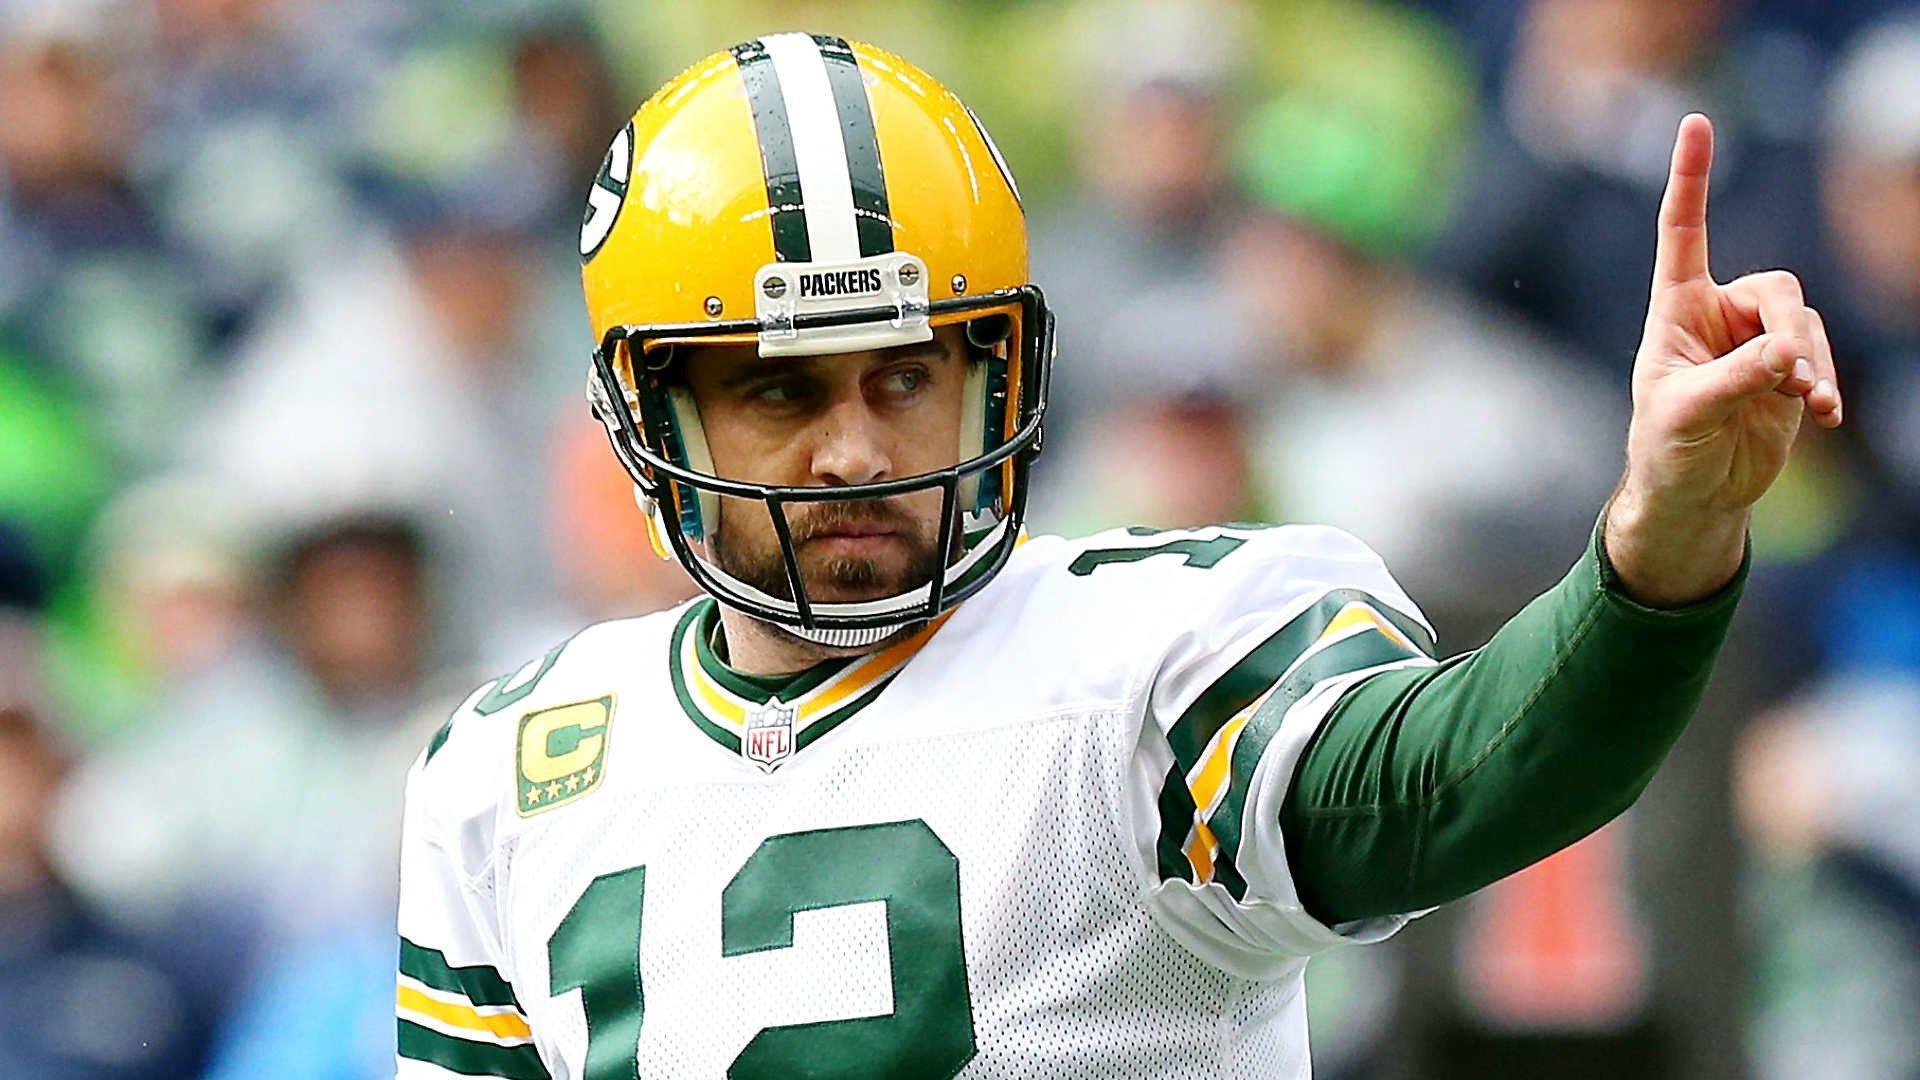 px aaron rodgers image 1080p high quality